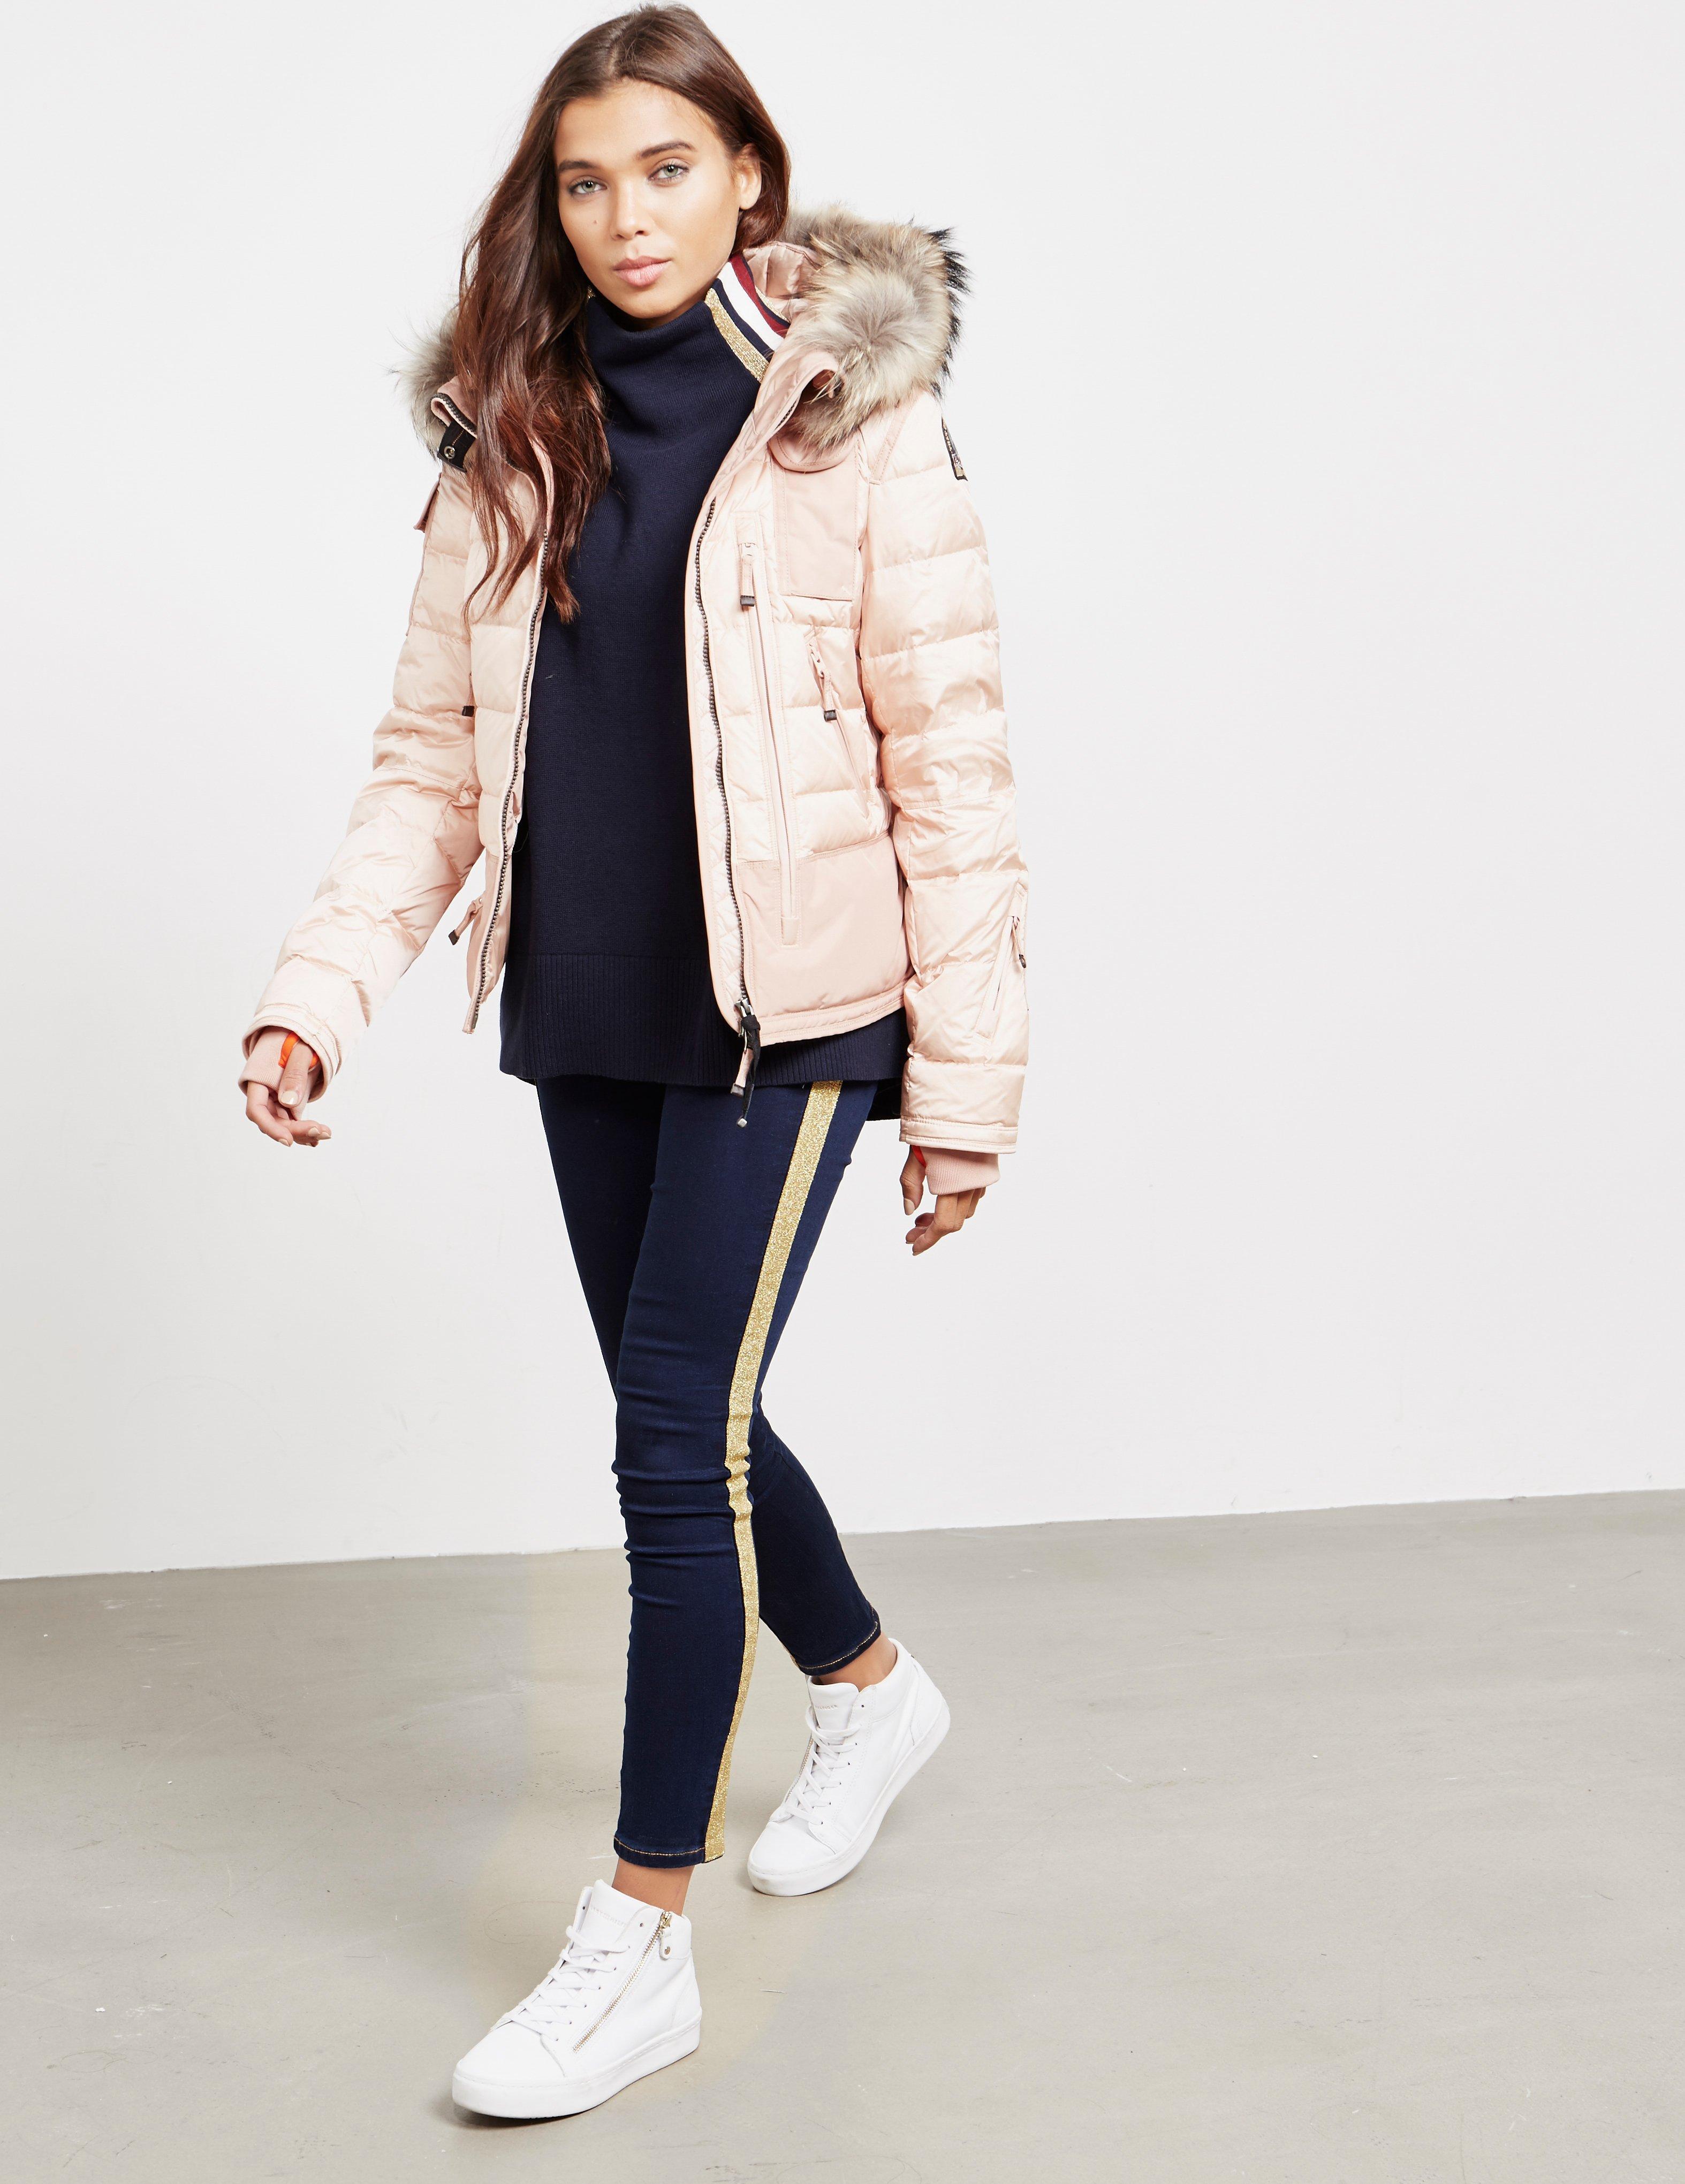 parajumpers pink